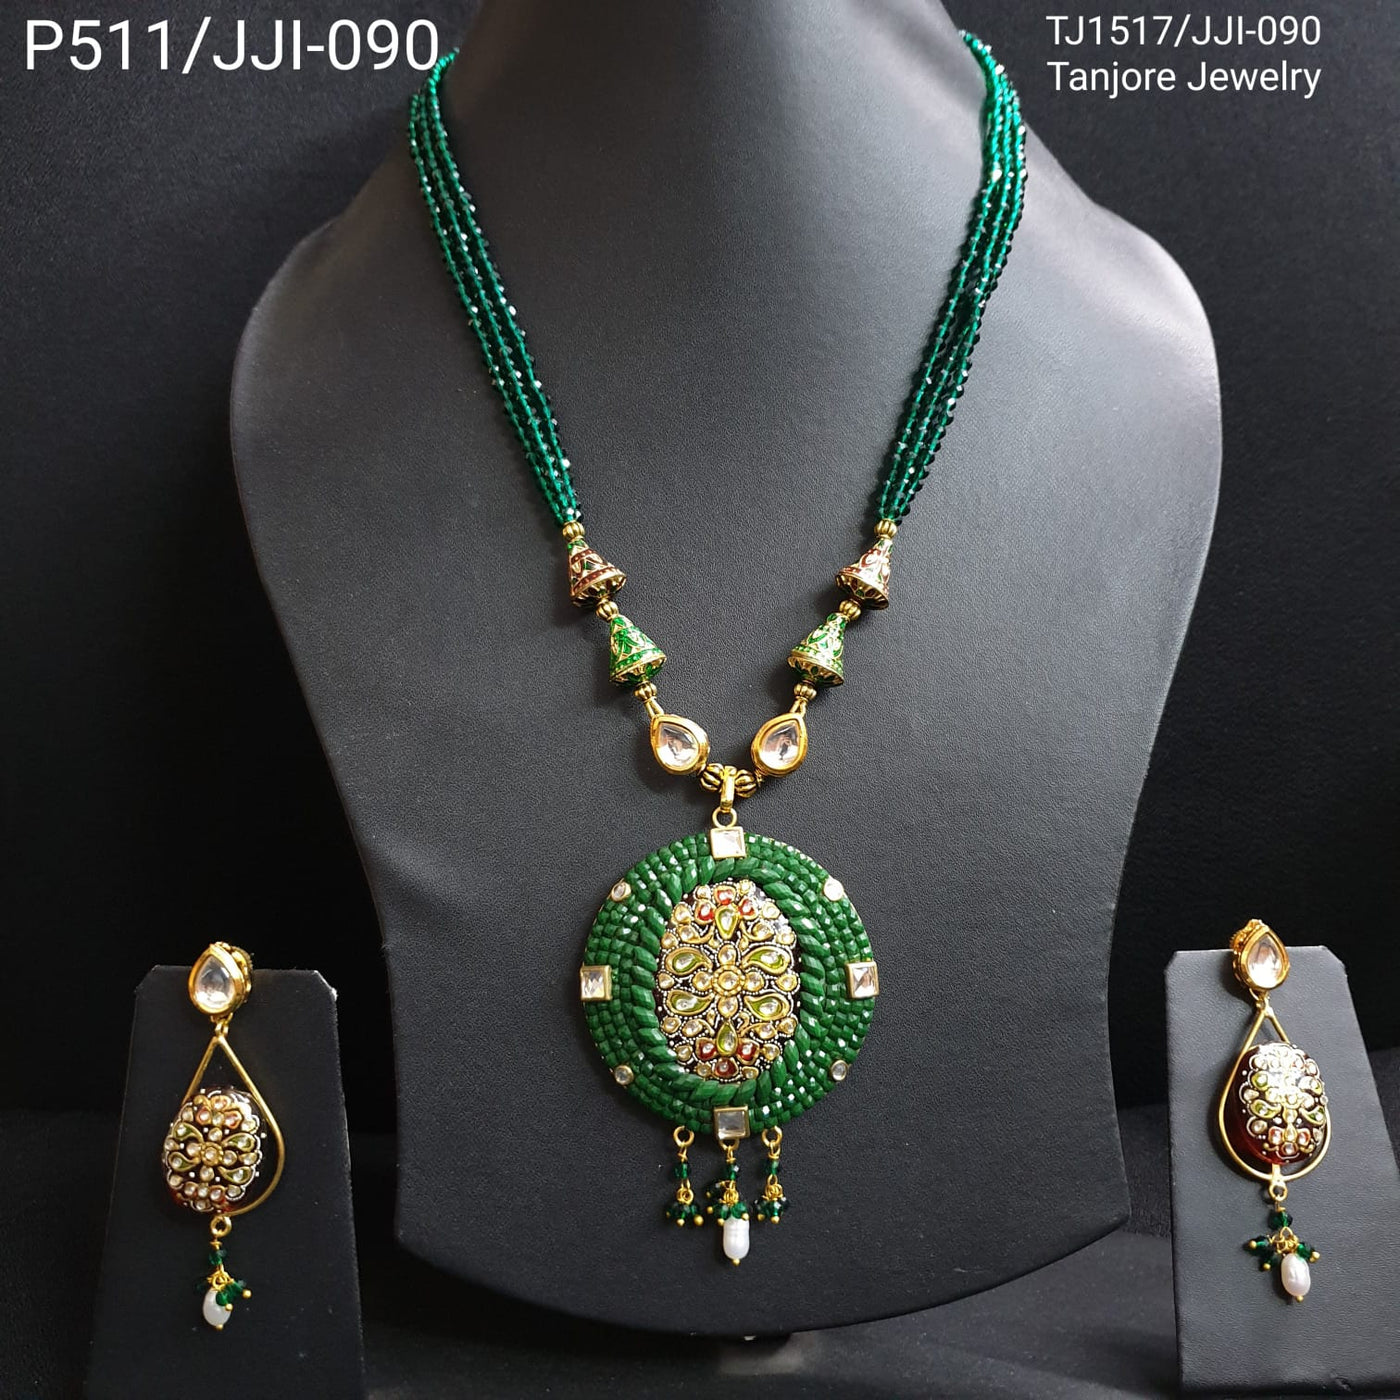 Green Tanjore And Takkar Work Pendant Set With Earrings